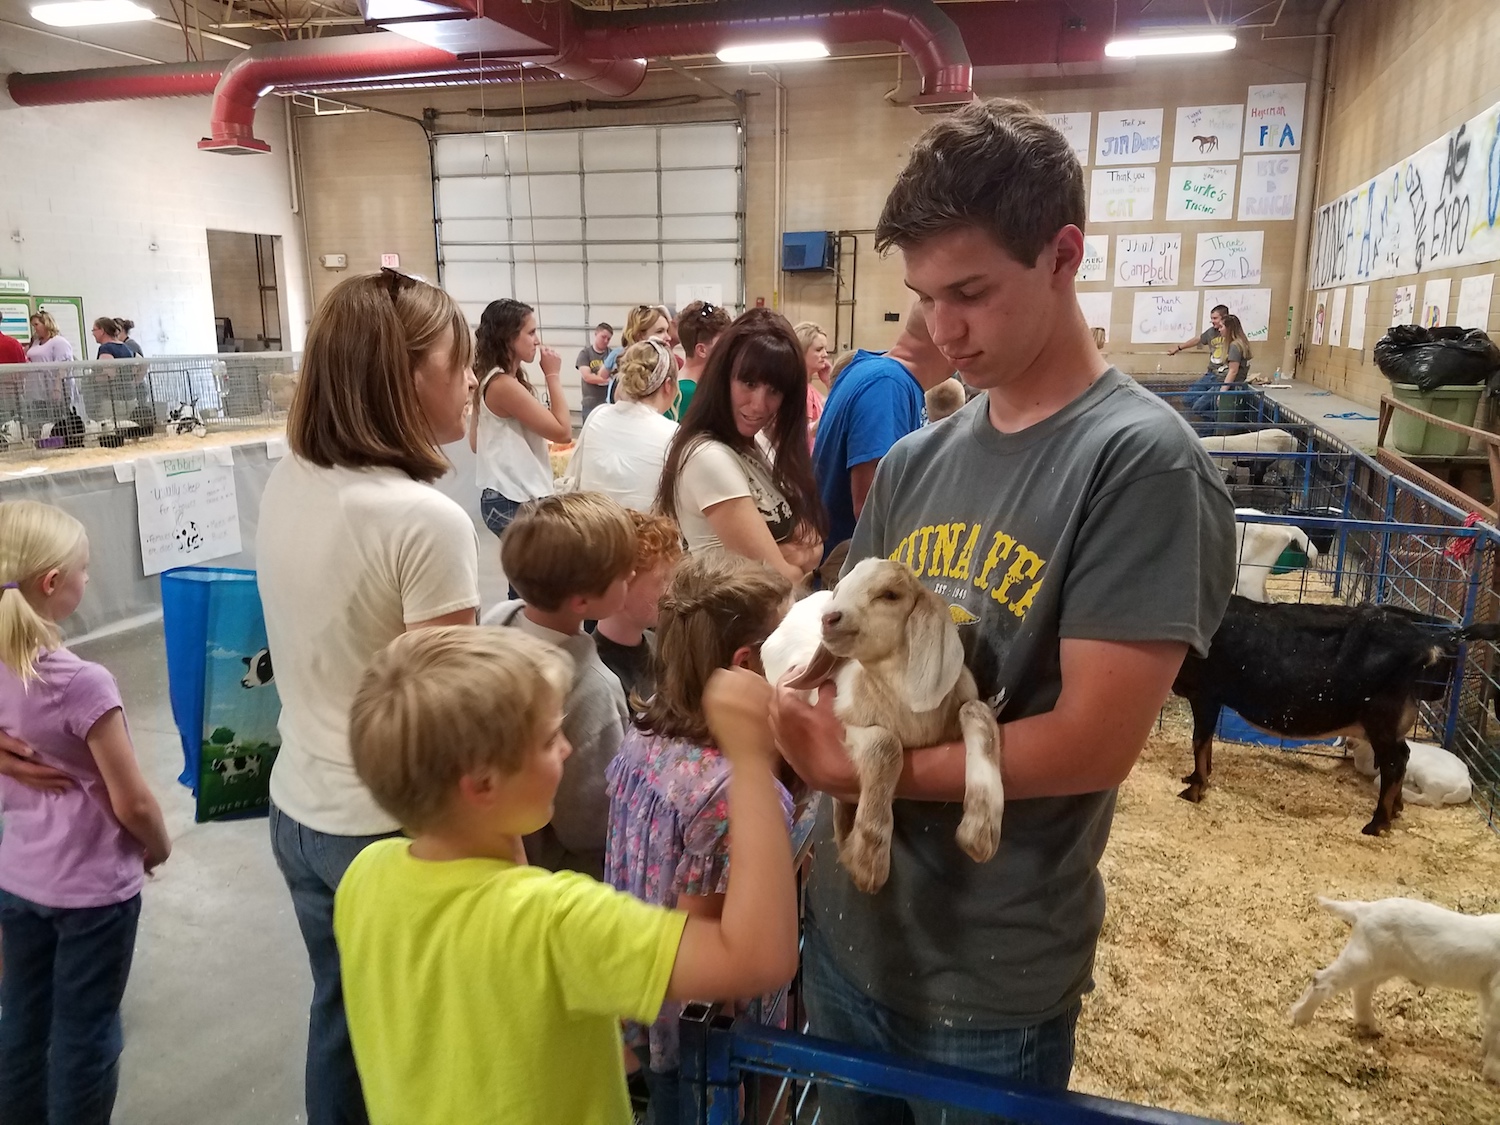 Kuna Ag Expo run by the Kuna High School's local chapter of the Future Farmers of America (FFA) teaches students about the agricultural industry.